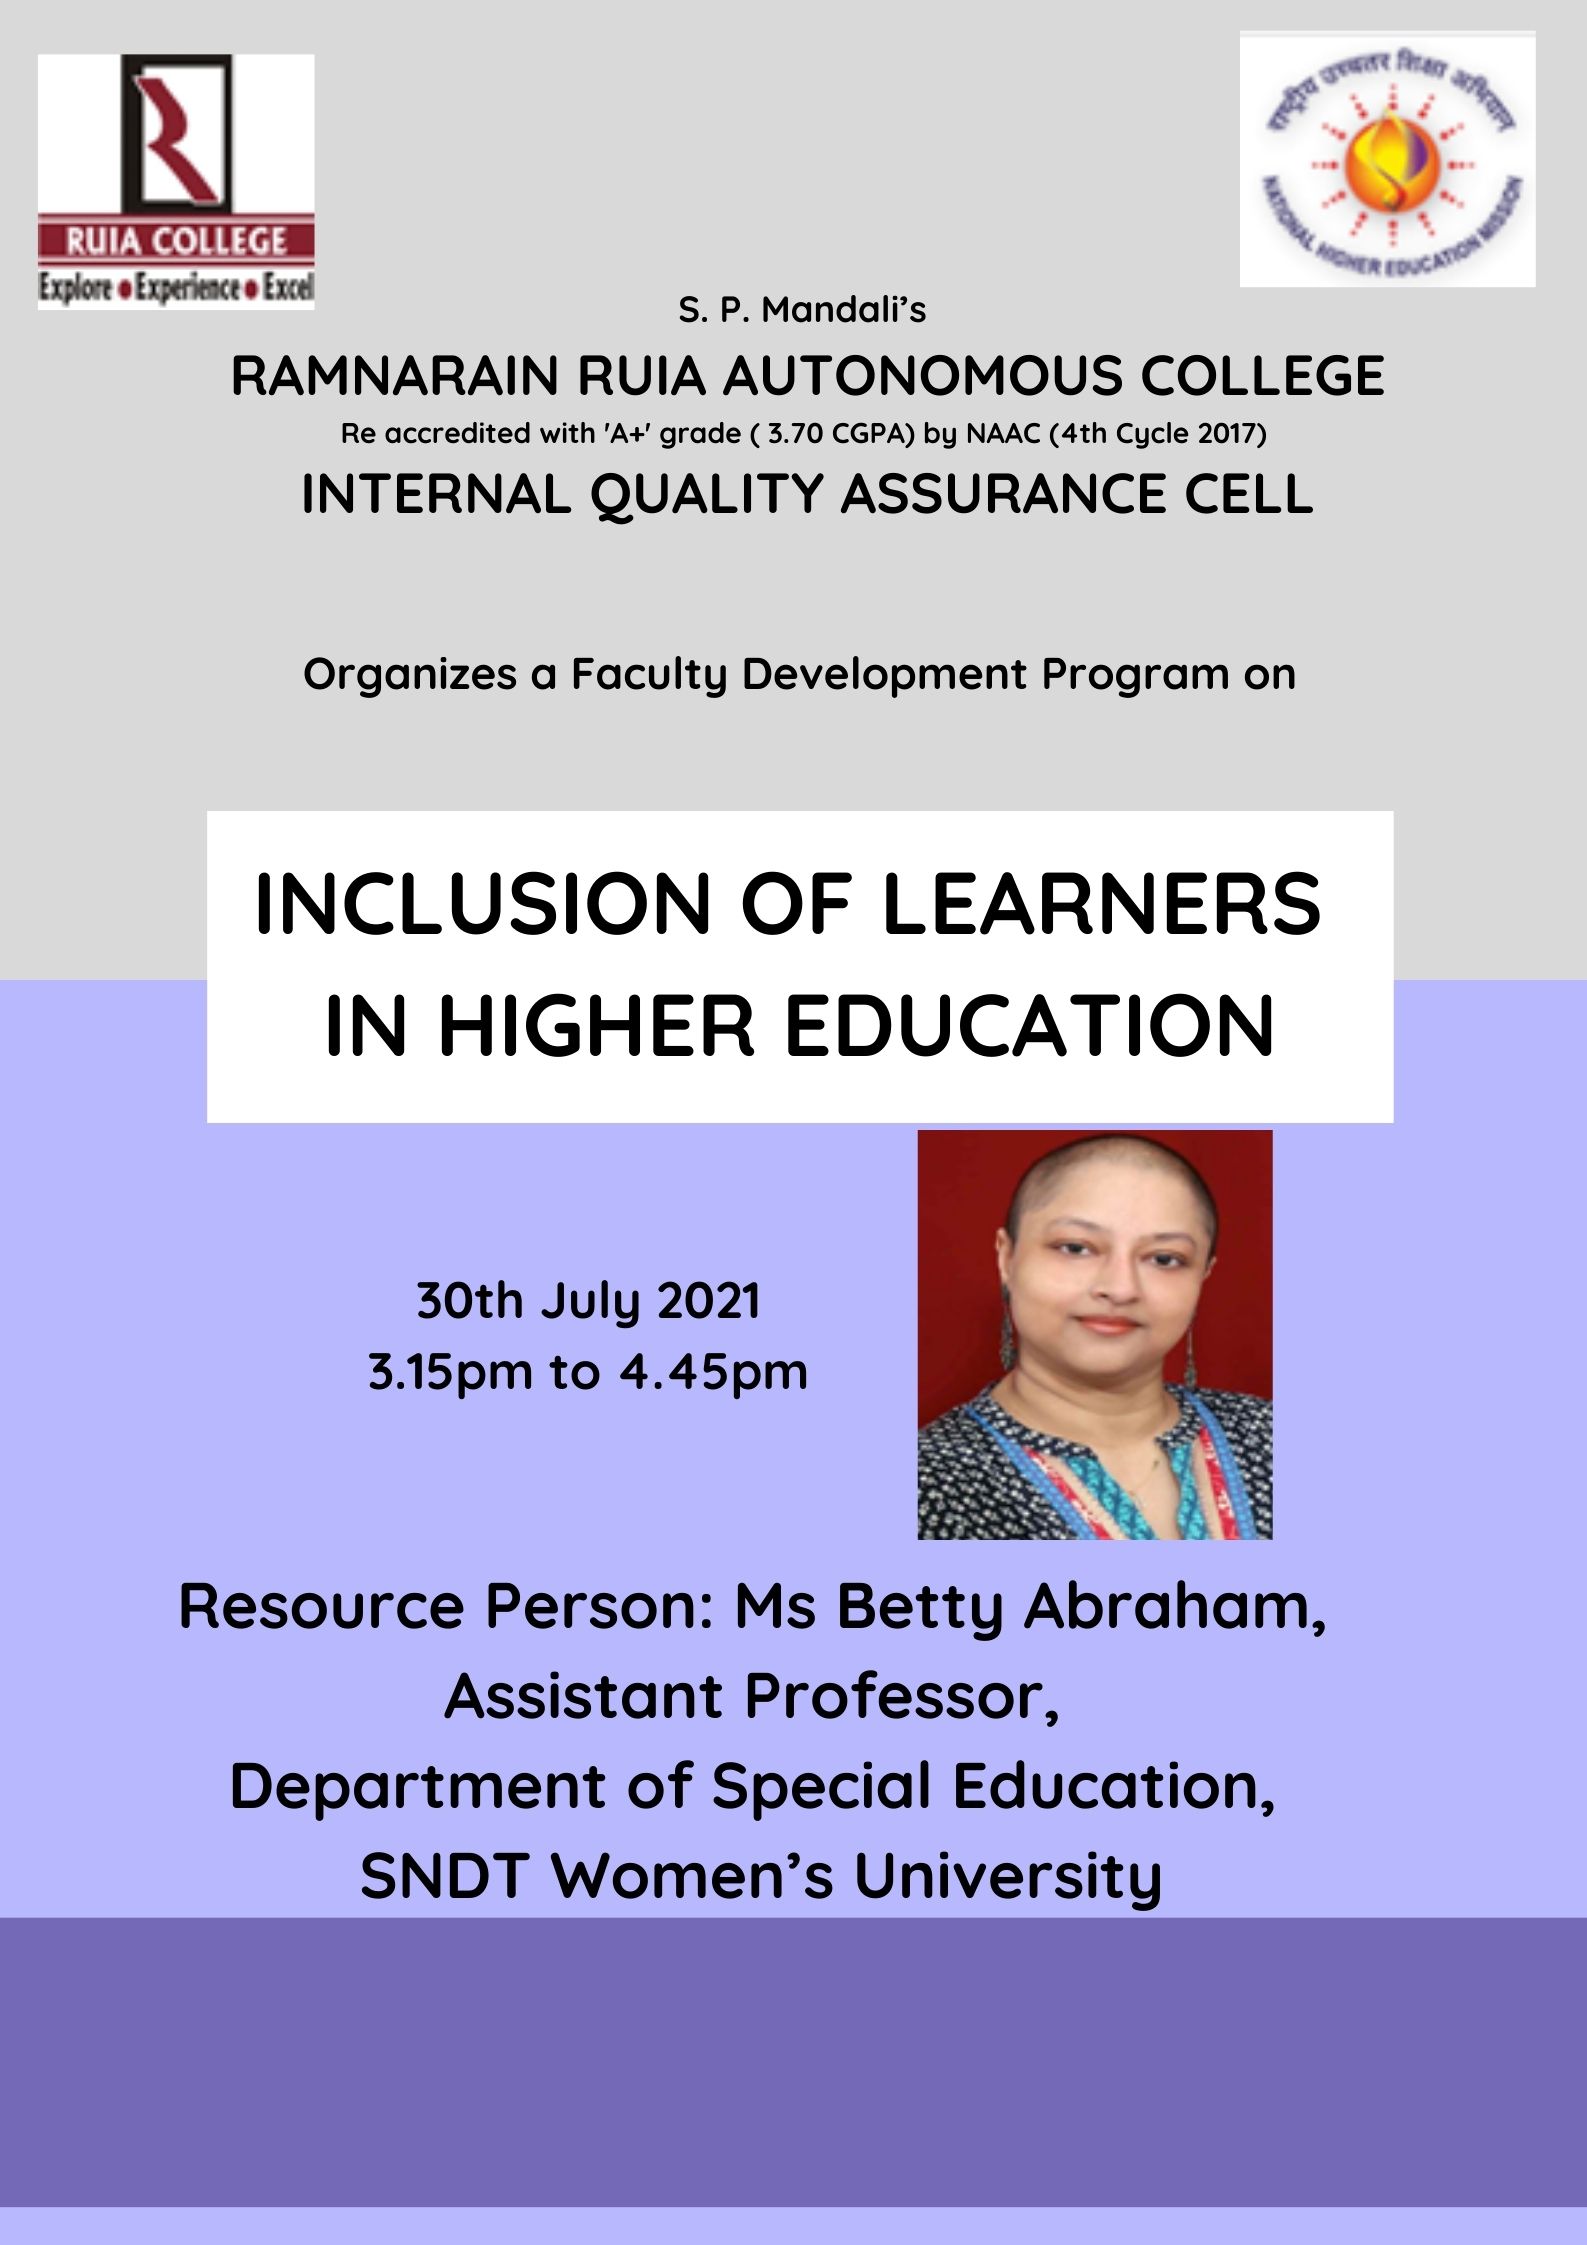 Inclusion of Learners in Higher Education